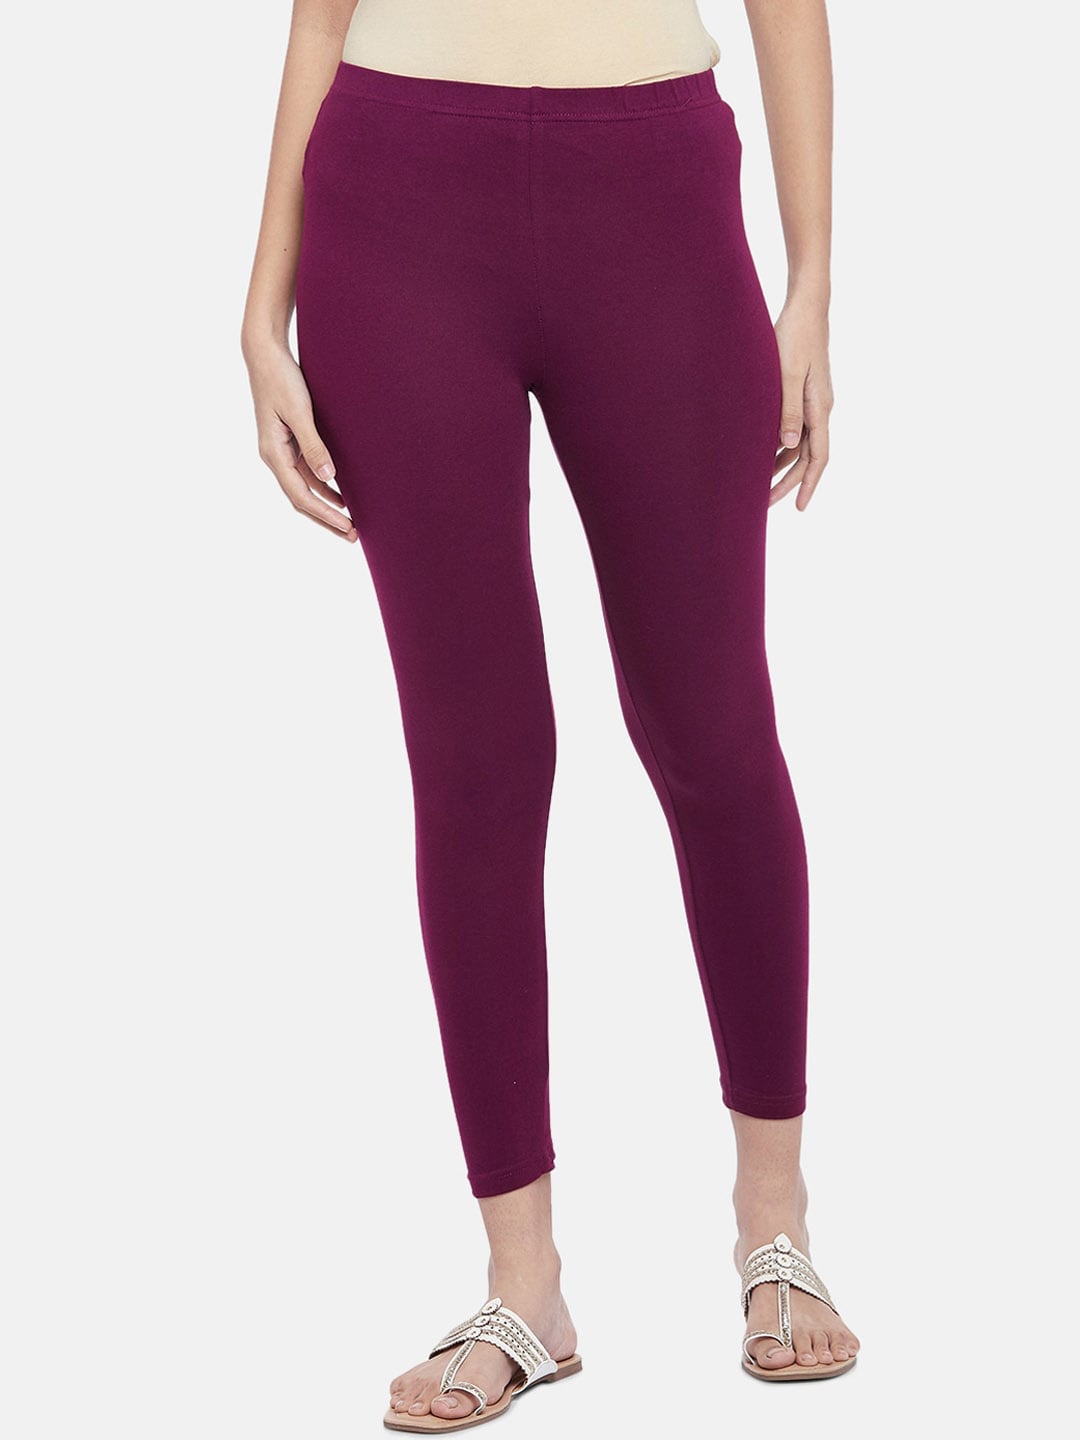 RANGMANCH BY PANTALOONS Women Magenta Solid Ankle Length Leggings Price in India